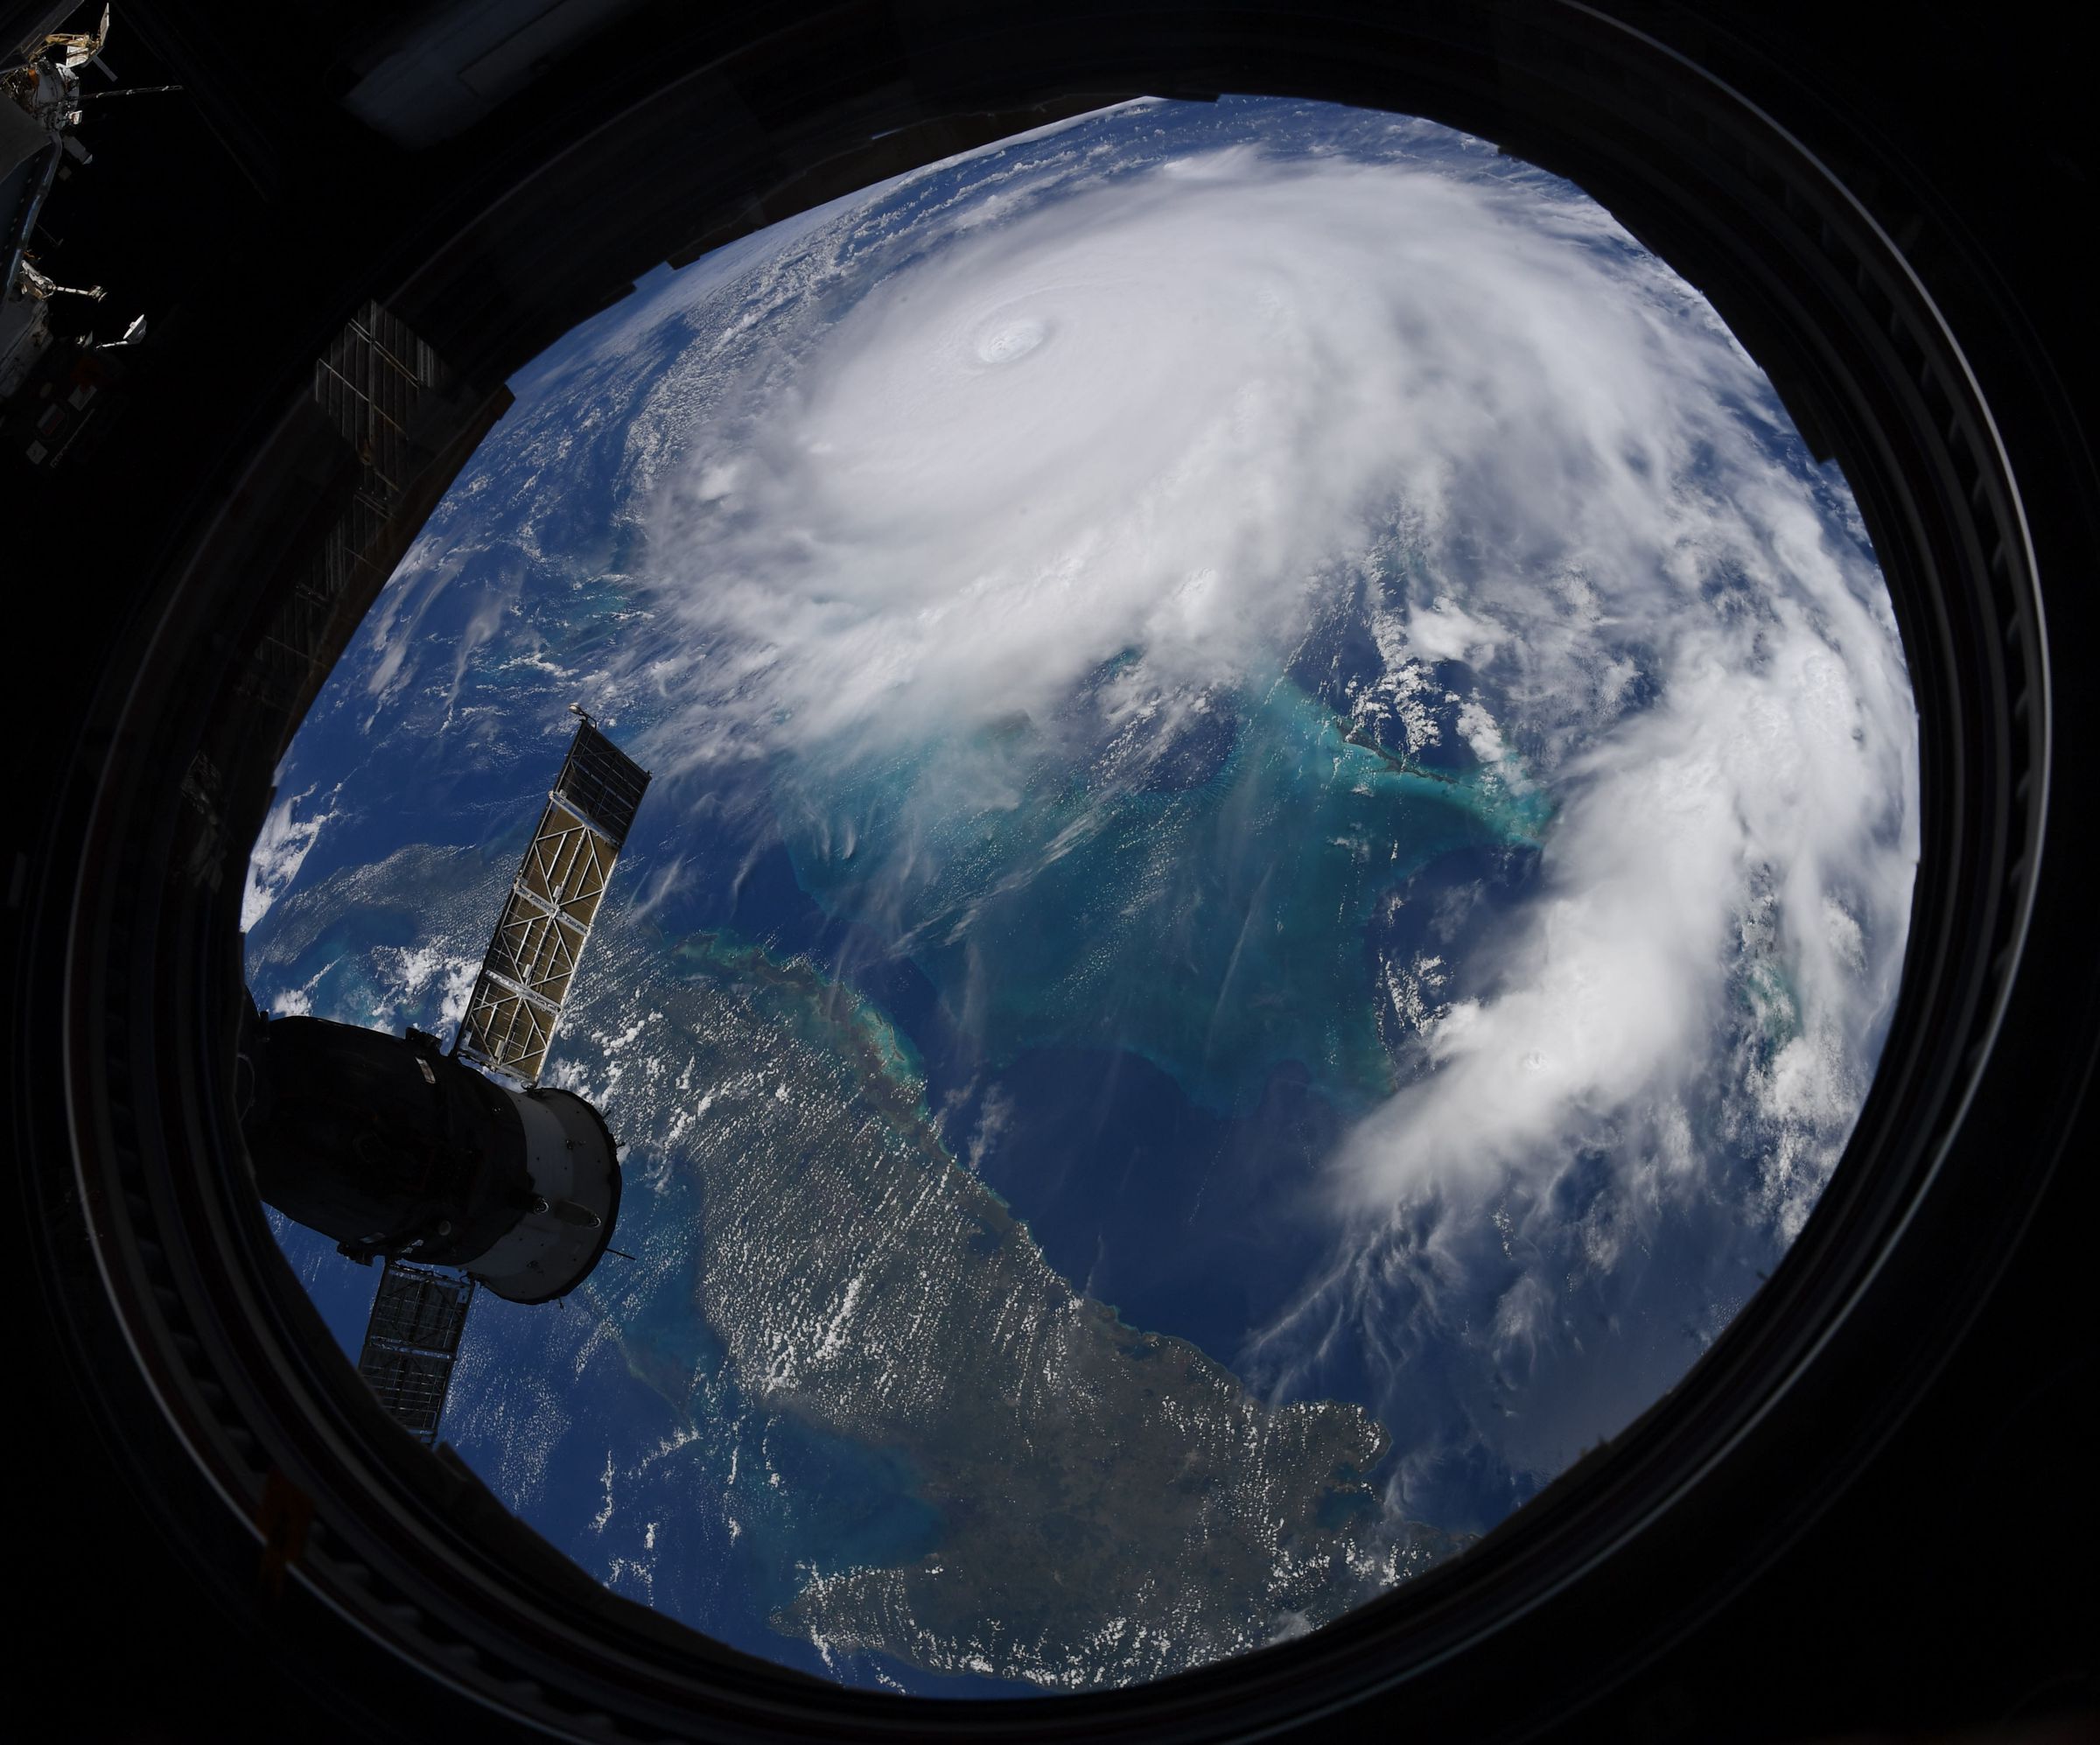 Another view of Hurricane Dorian as seen from the ISS on September 2nd.